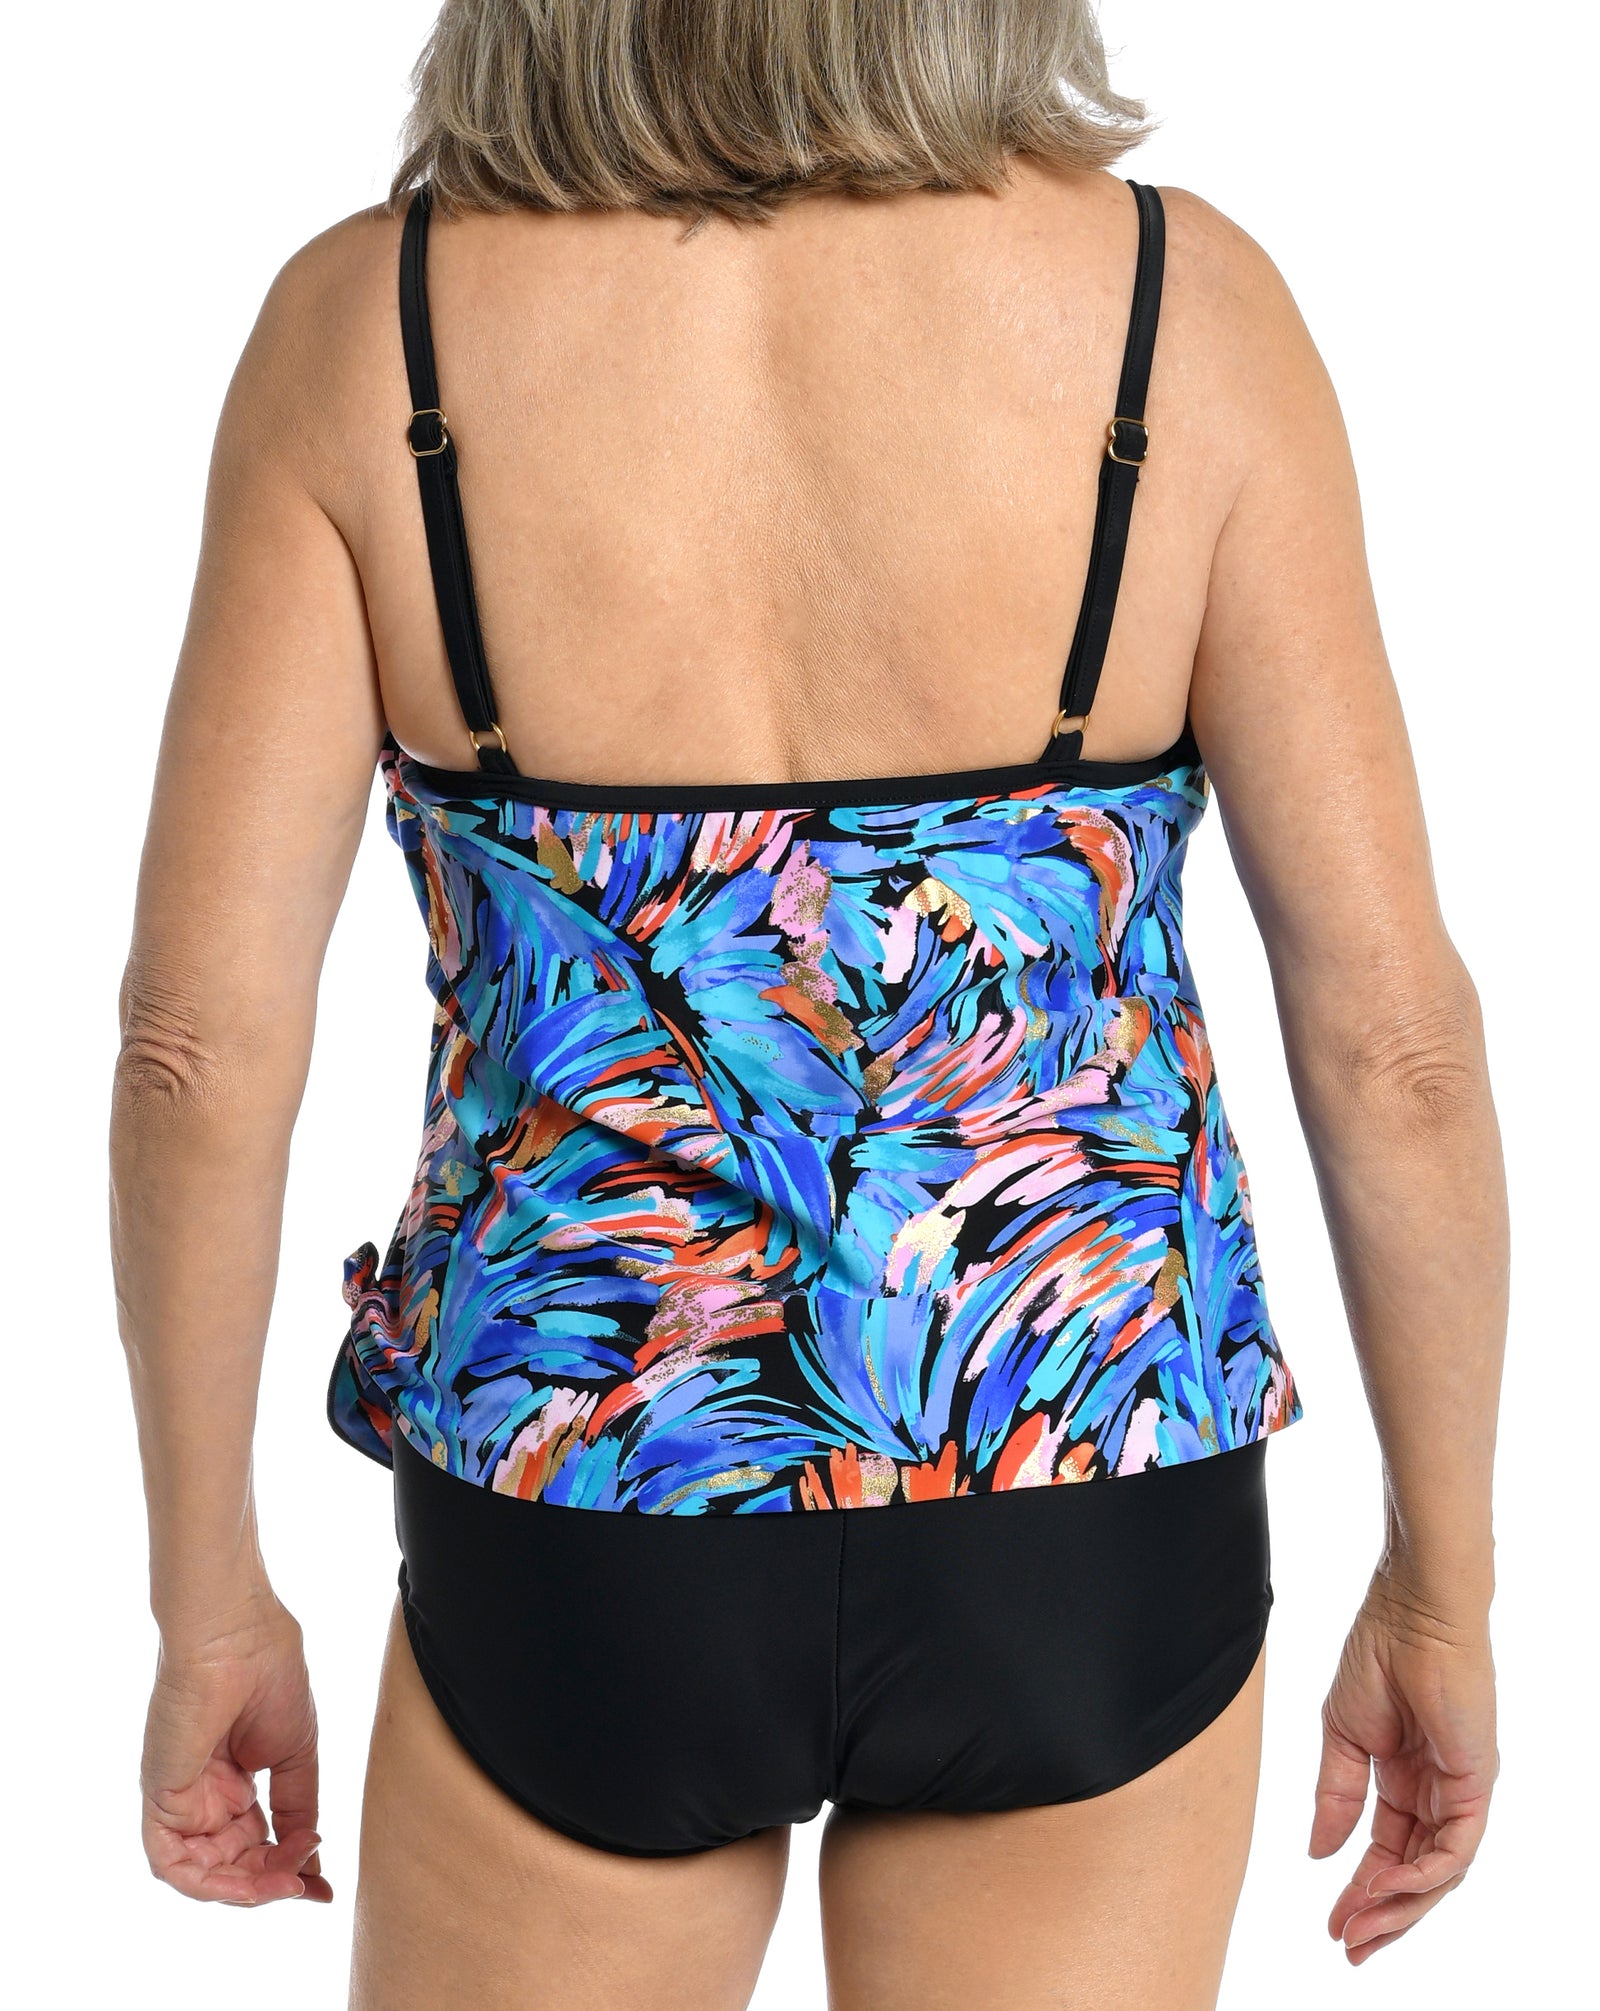 Feathers & Flair Collection  Scoop Neck Faux Tankini One Piece   Fabric Content: 82% Nylon / 18% Lycra Xtra Life Elastane  Product#: MM3CE12